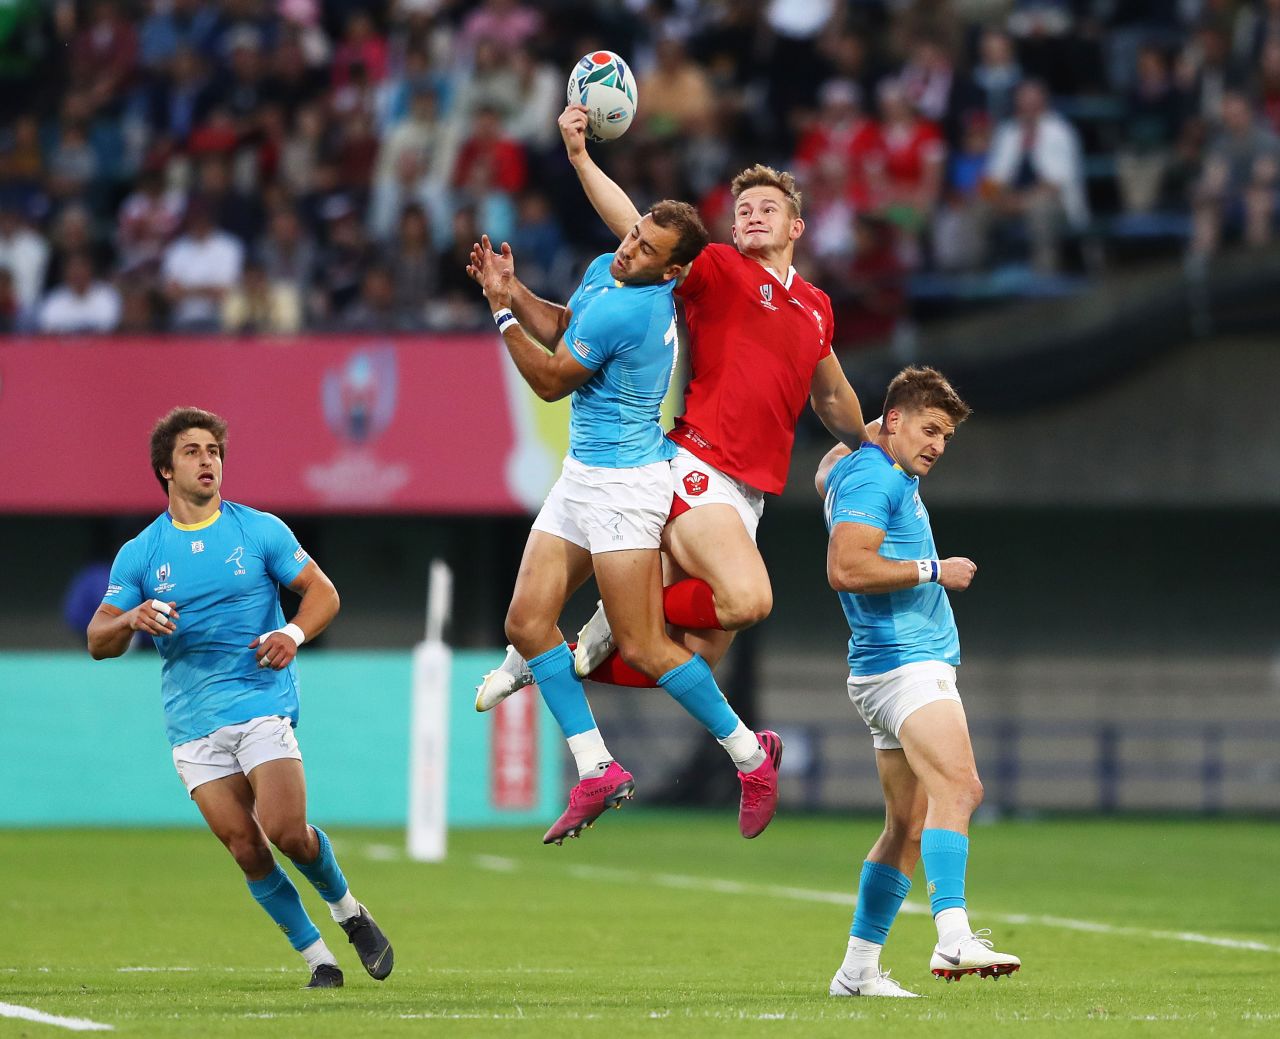 Hallam Amos of Wales and Gaston Mieres of Uruguay jump for a high ball. Wales beat Uruguay 35-13, qualifying them for a quarterfinal match against France.